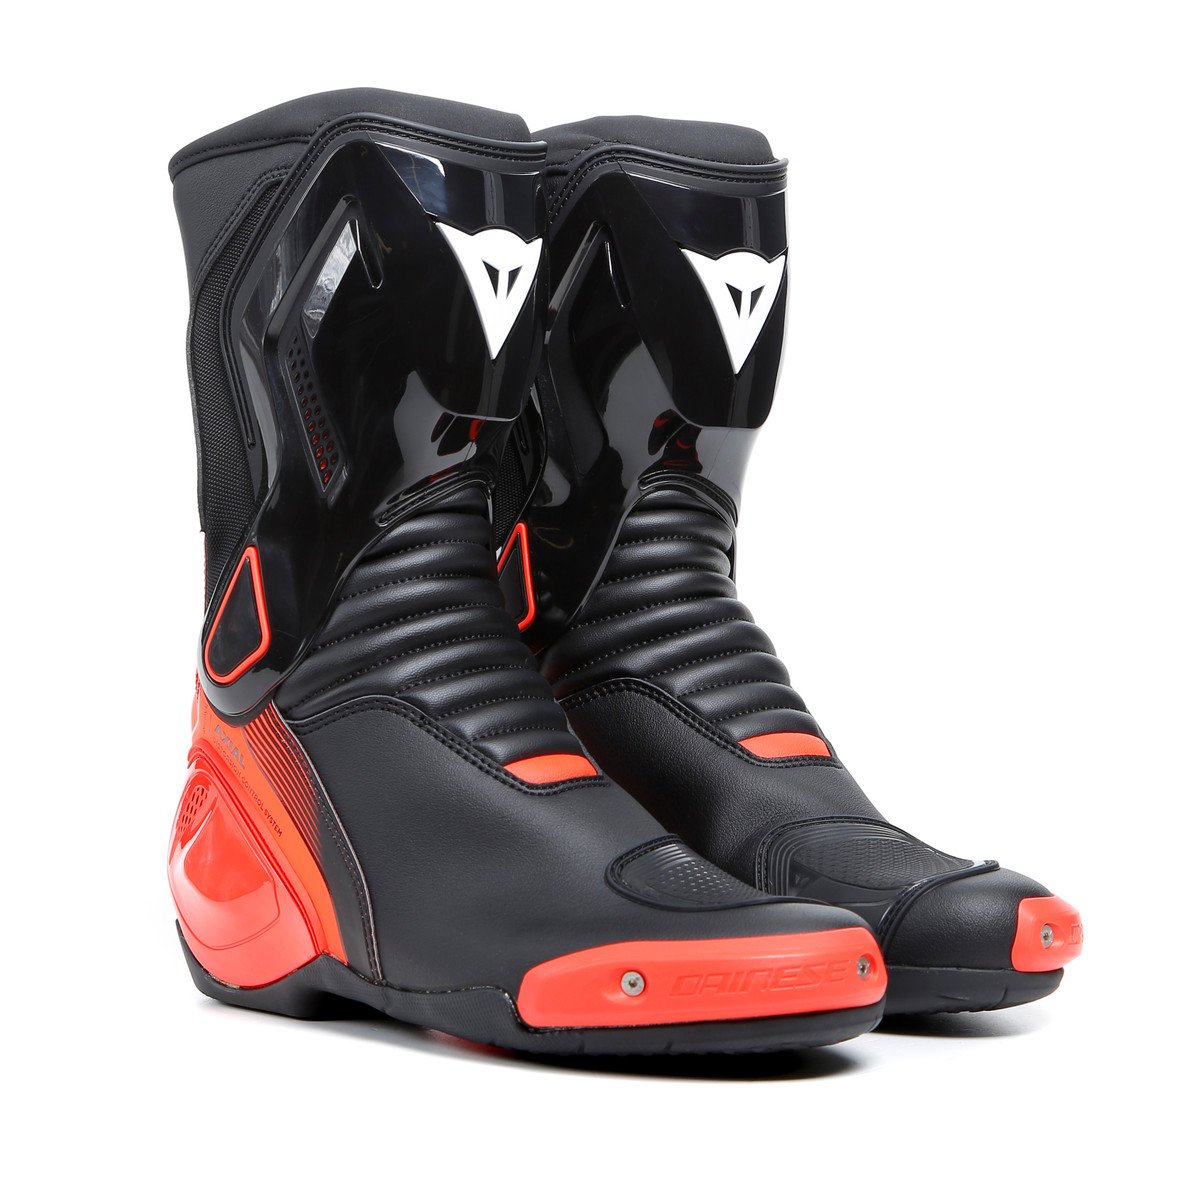 Image of Dainese Nexus 2 Boots Black Fluo Red Size 41 EN